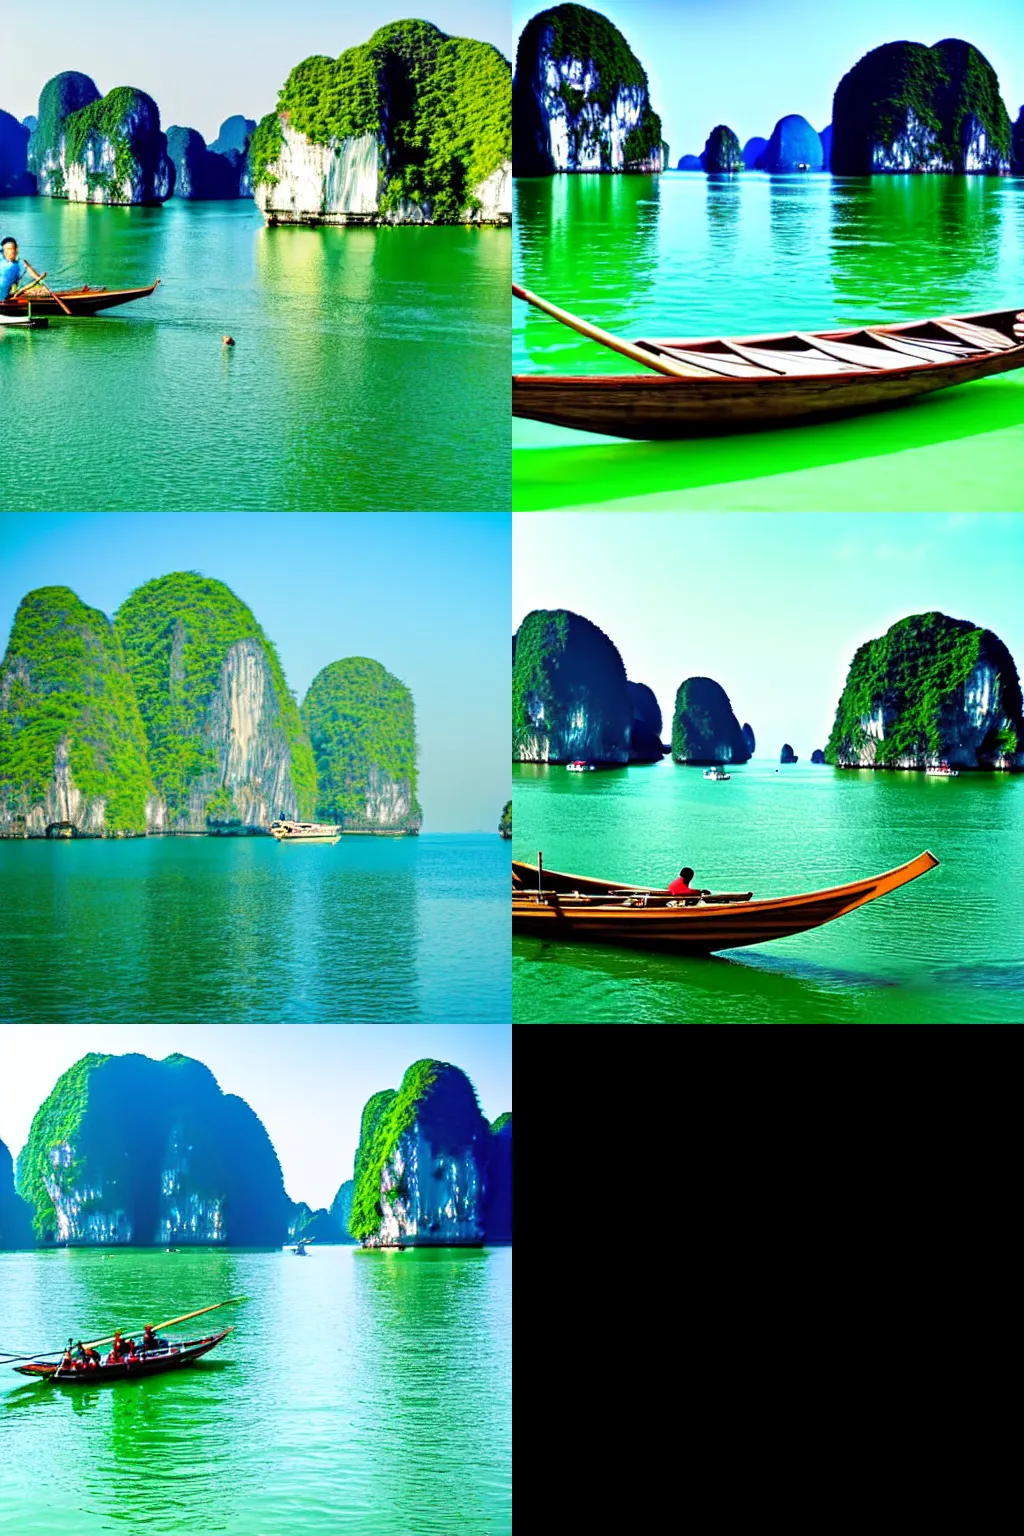 Prompt: ha long bay, pastel green shades, circular frame, blue sky, rower on water